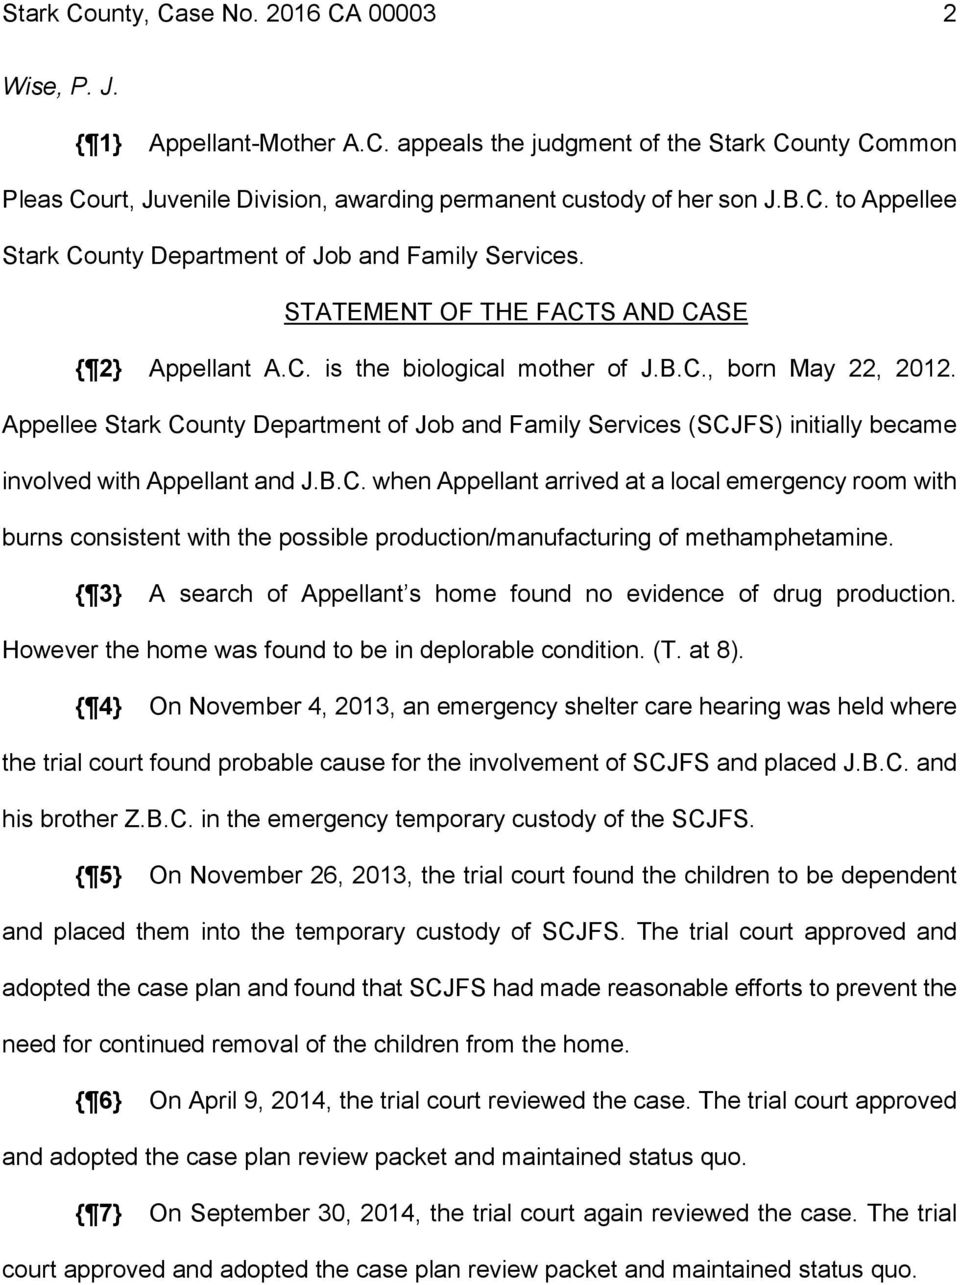 Appellee Stark County Department of Job and Family Services (SCJFS) initially became involved with Appellant and J.B.C. when Appellant arrived at a local emergency room with burns consistent with the possible production/manufacturing of methamphetamine.